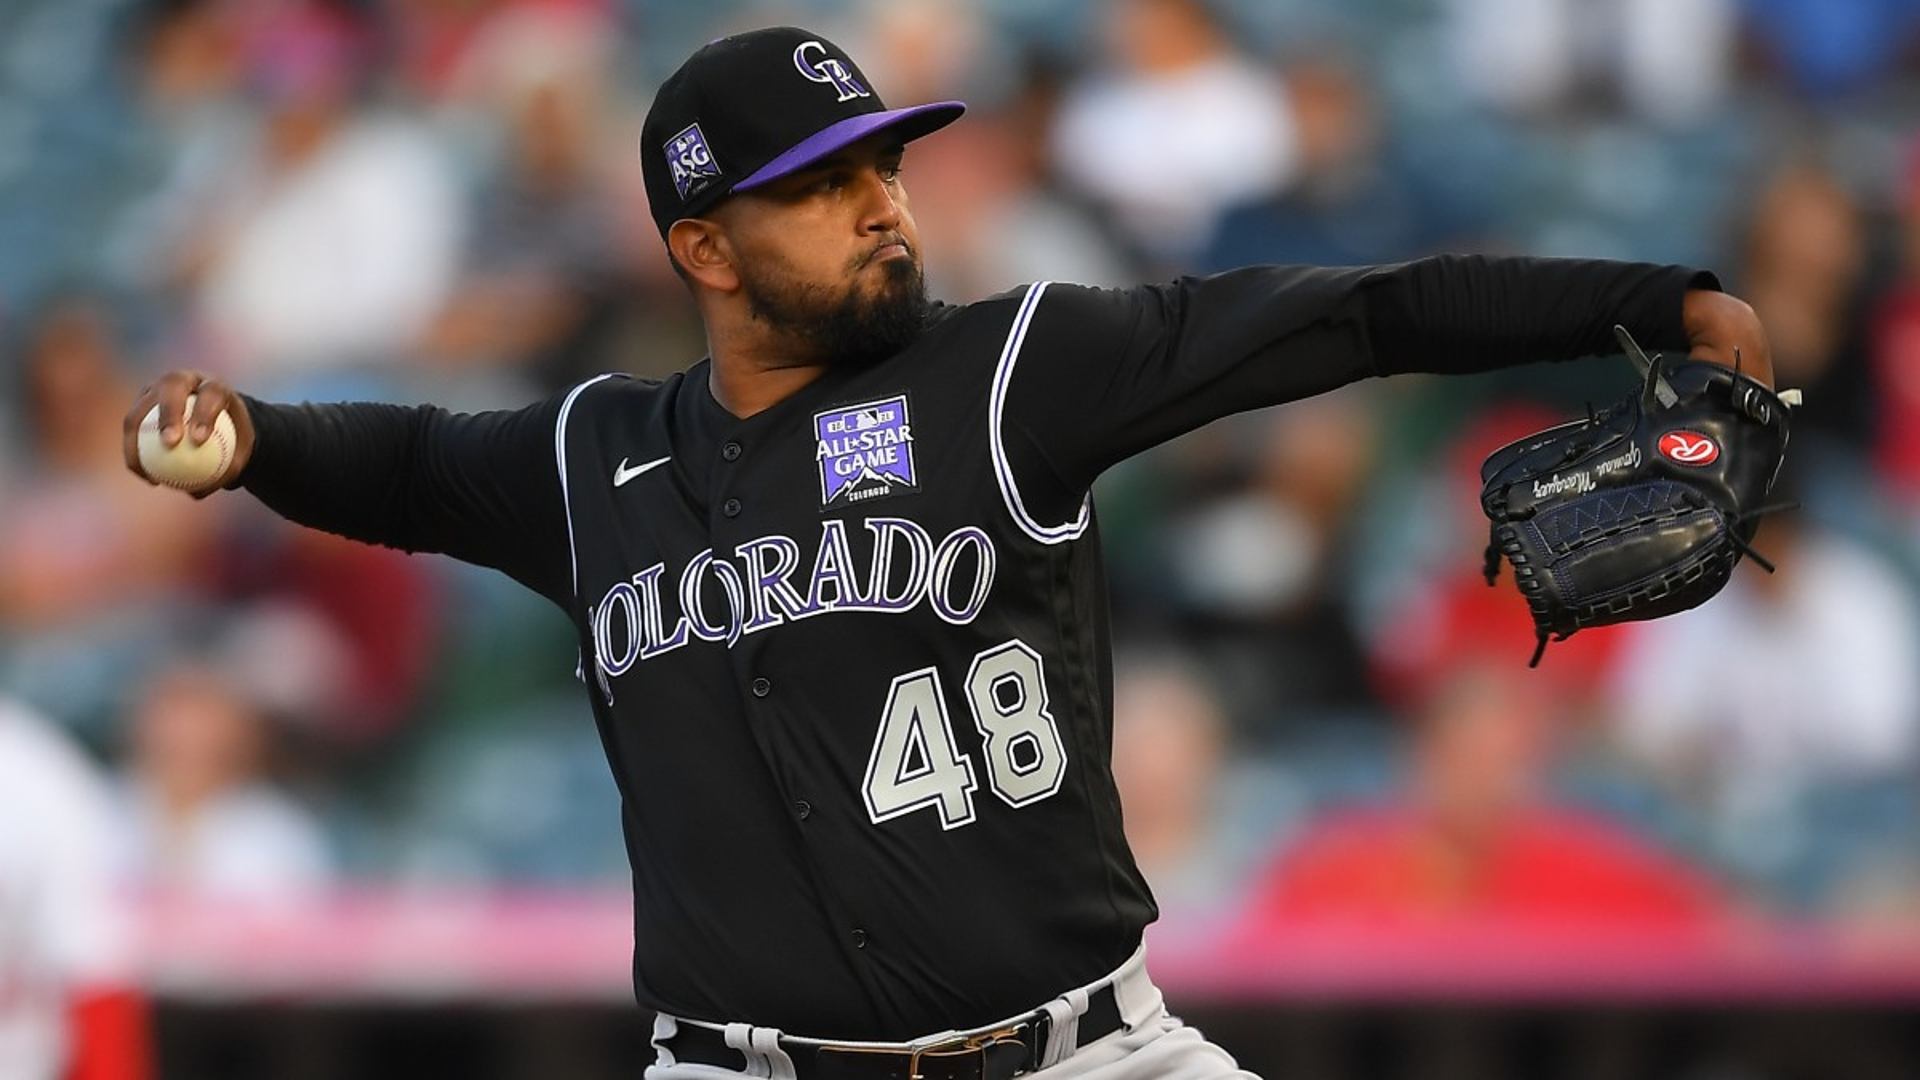 The match Colorado Rockies vs Arizona Diamondbacks will take place at Coors Field in Dever on September 11 at 3:10 PM ET.